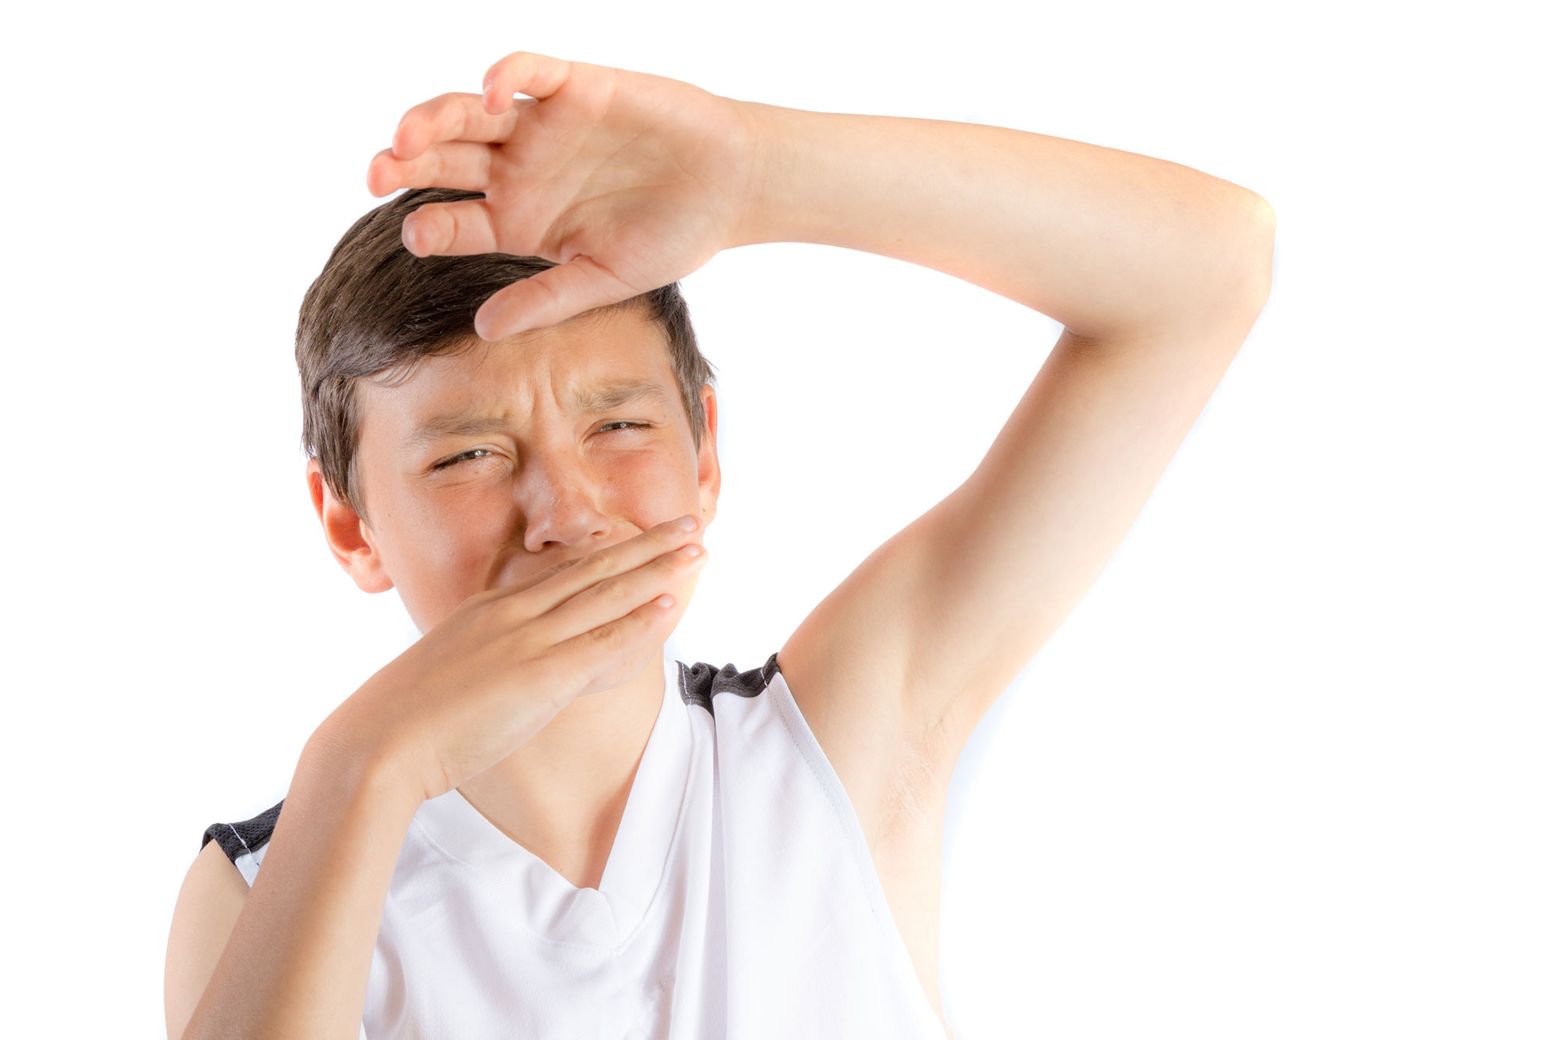 How to talk to tweens about body odor (without making it awkward)